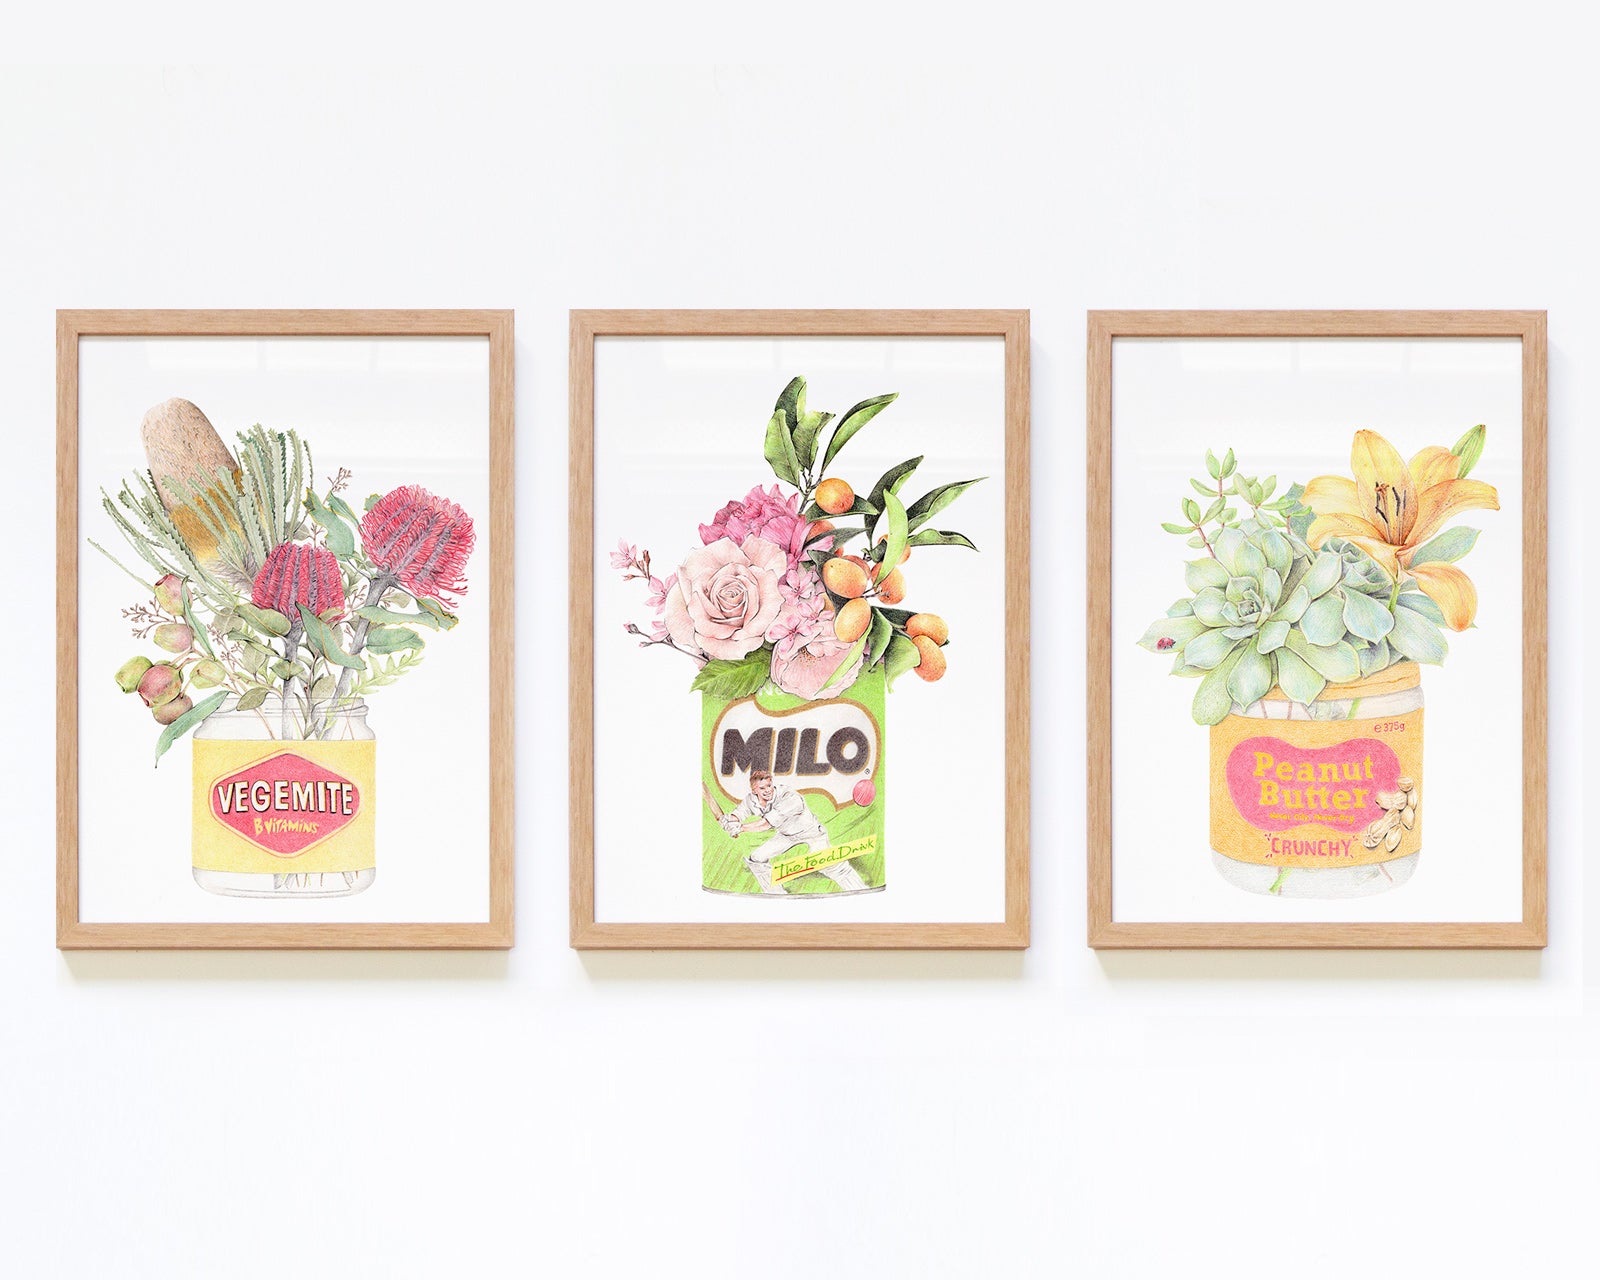 Set of 3 framed kitchen art prints with iconic Australian products